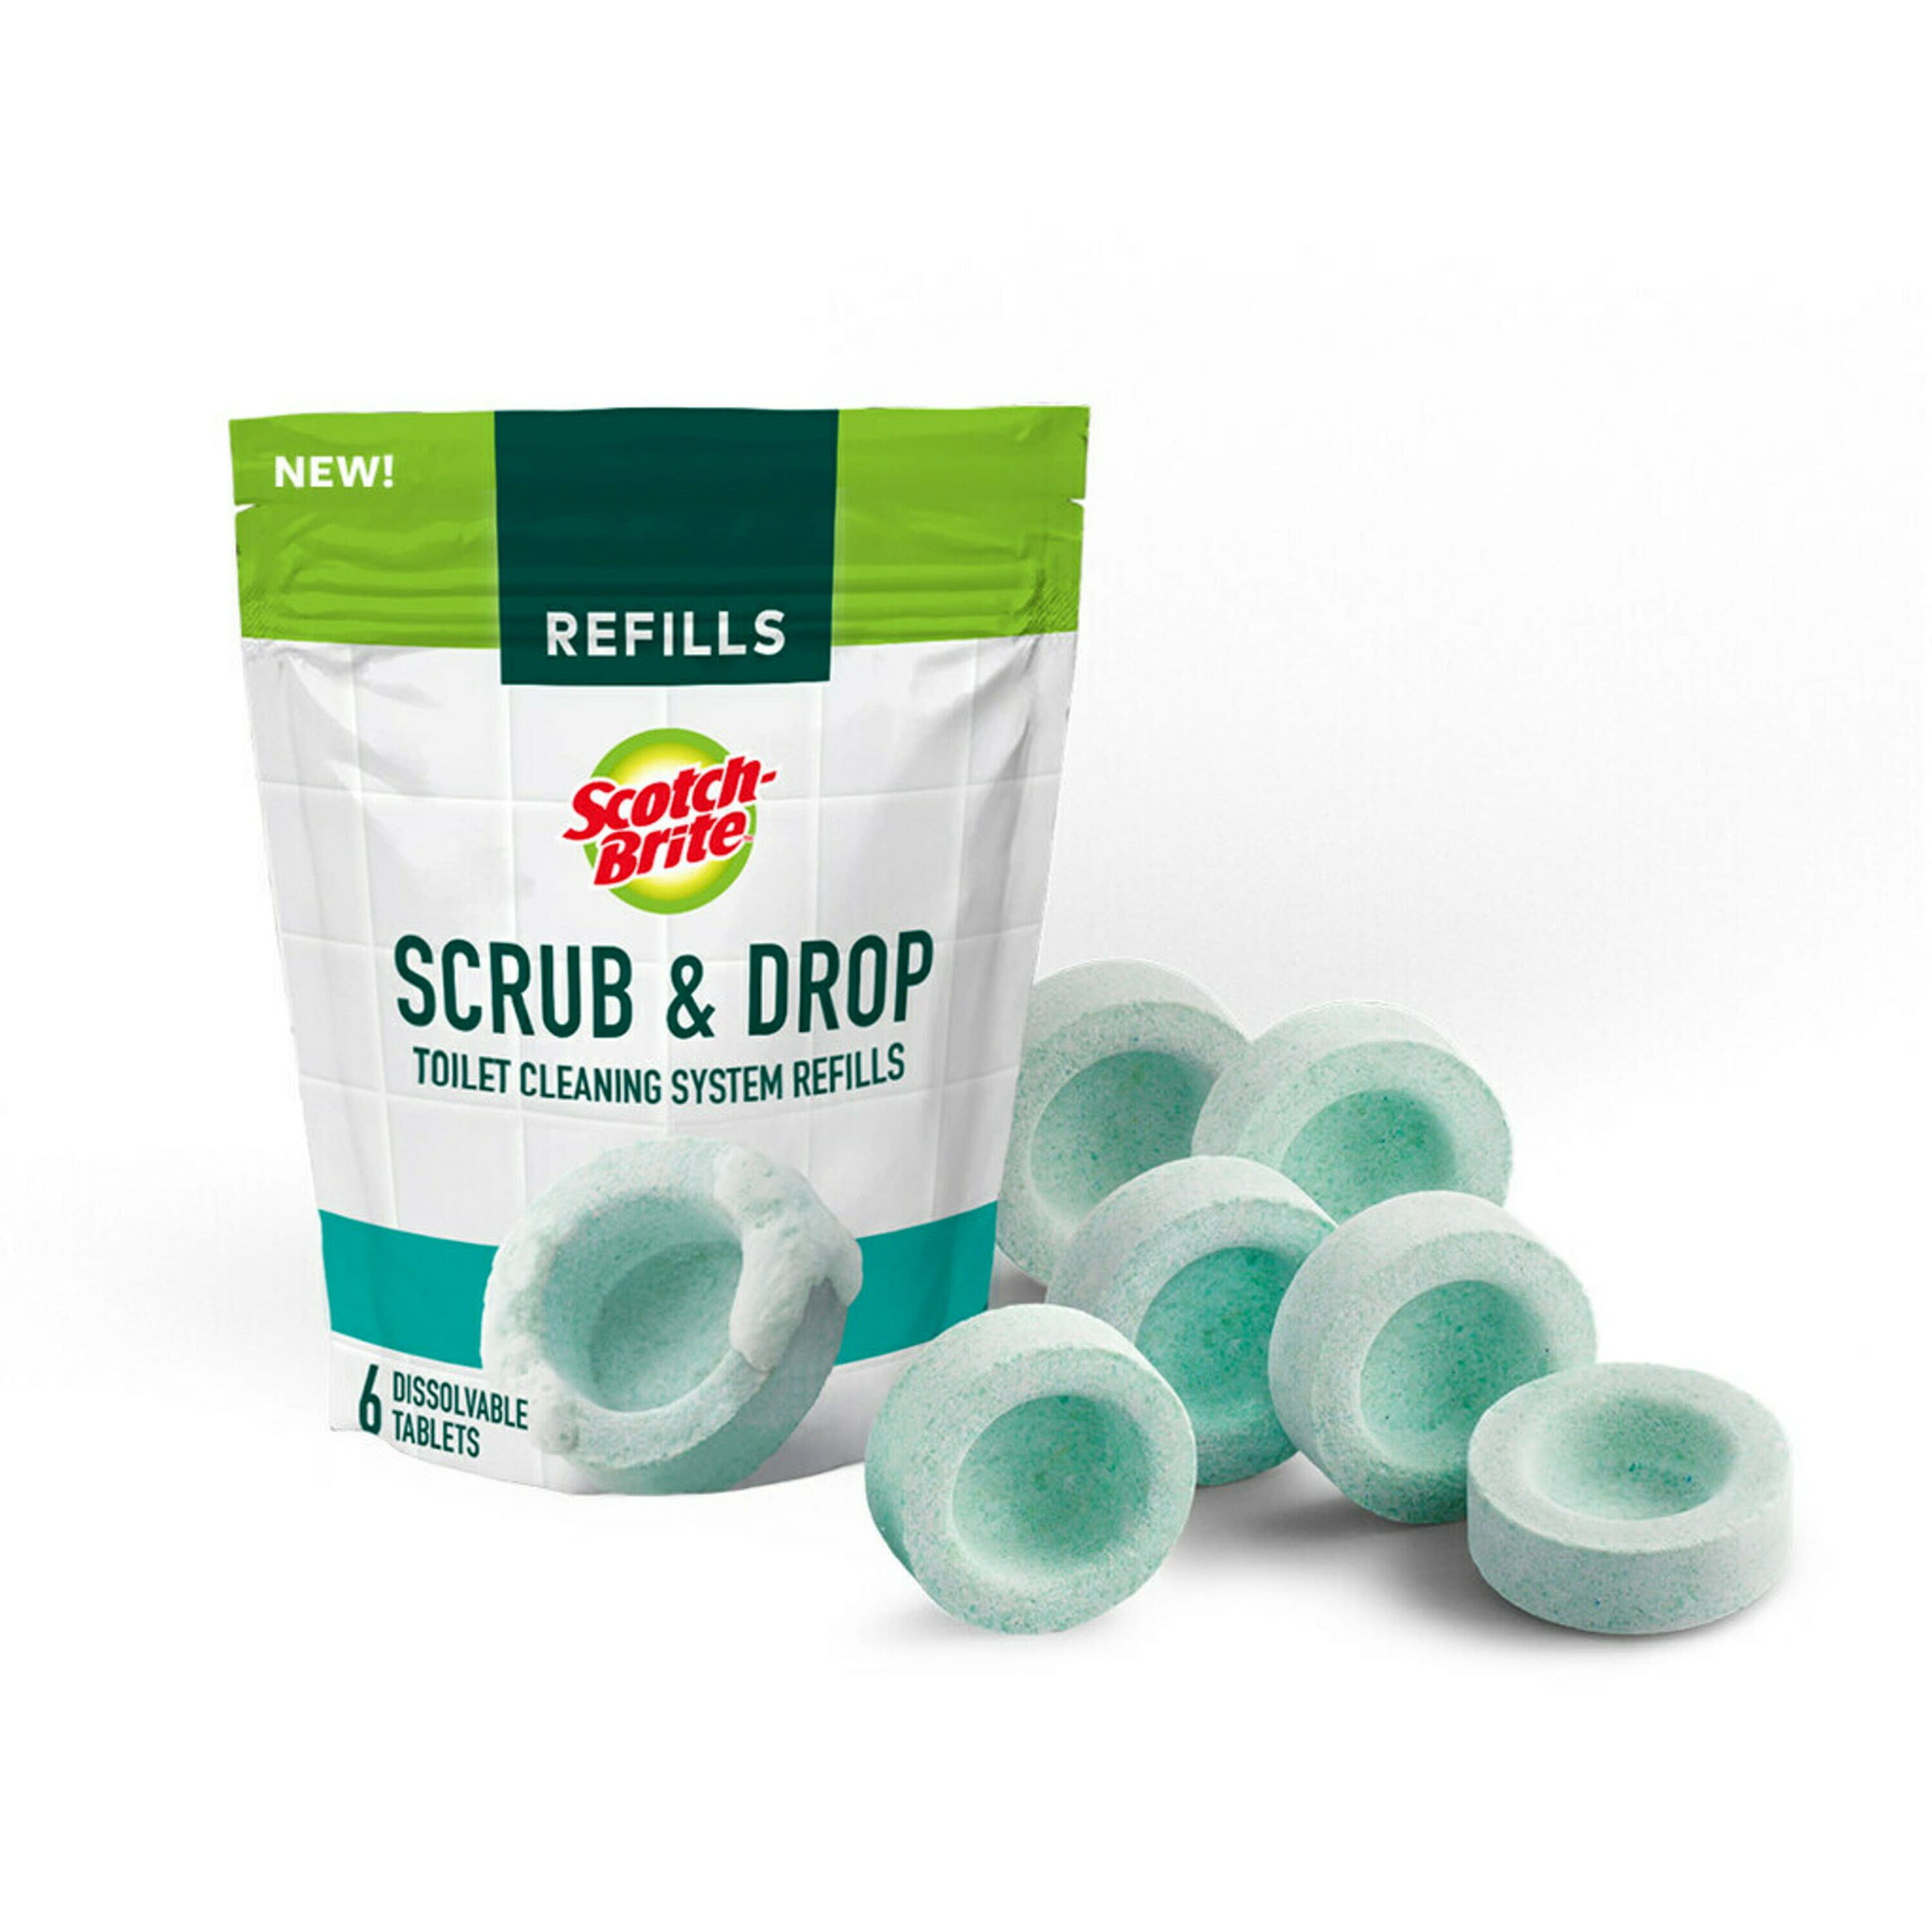 Scotch-Brite Scrub & Drop Toilet Cleaning System Refill, 6 Tablets